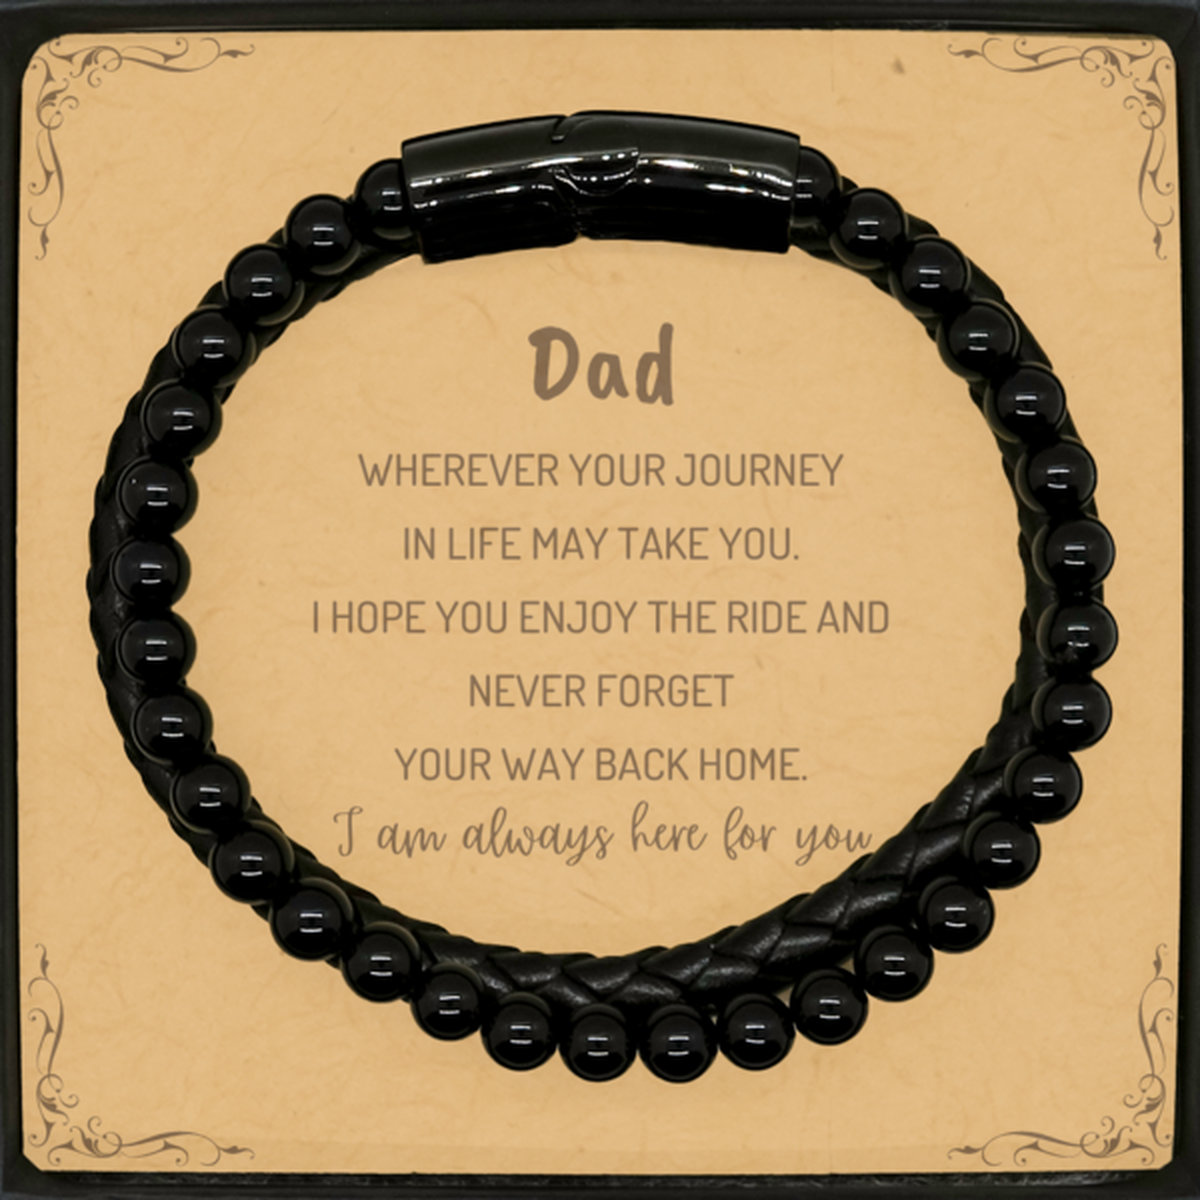 Dad wherever your journey in life may take you, I am always here for you Dad Stone Leather Bracelets, Awesome Christmas Gifts For Dad Message Card, Dad Birthday Gifts for Men Women Family Loved One